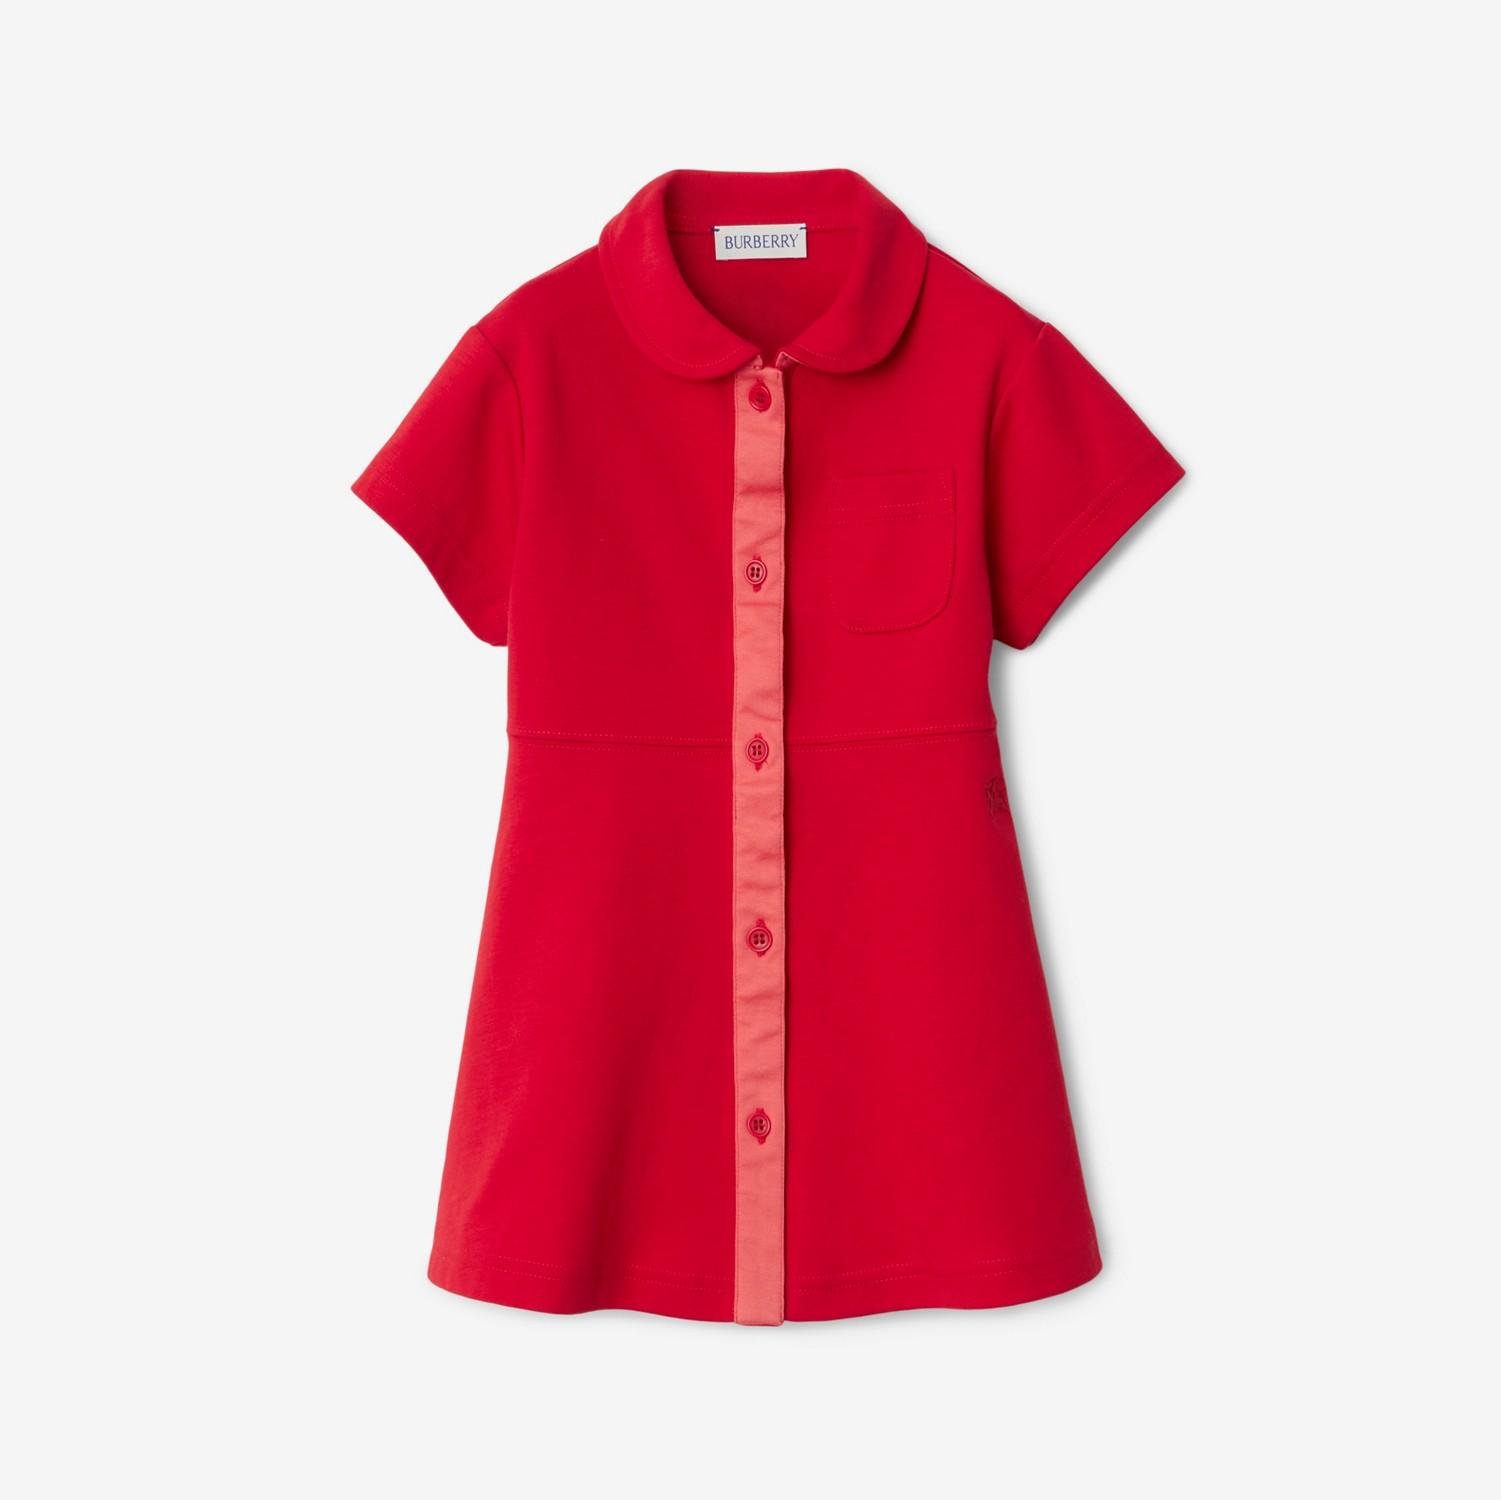 Cotton Jersey Dress by BURBERRY